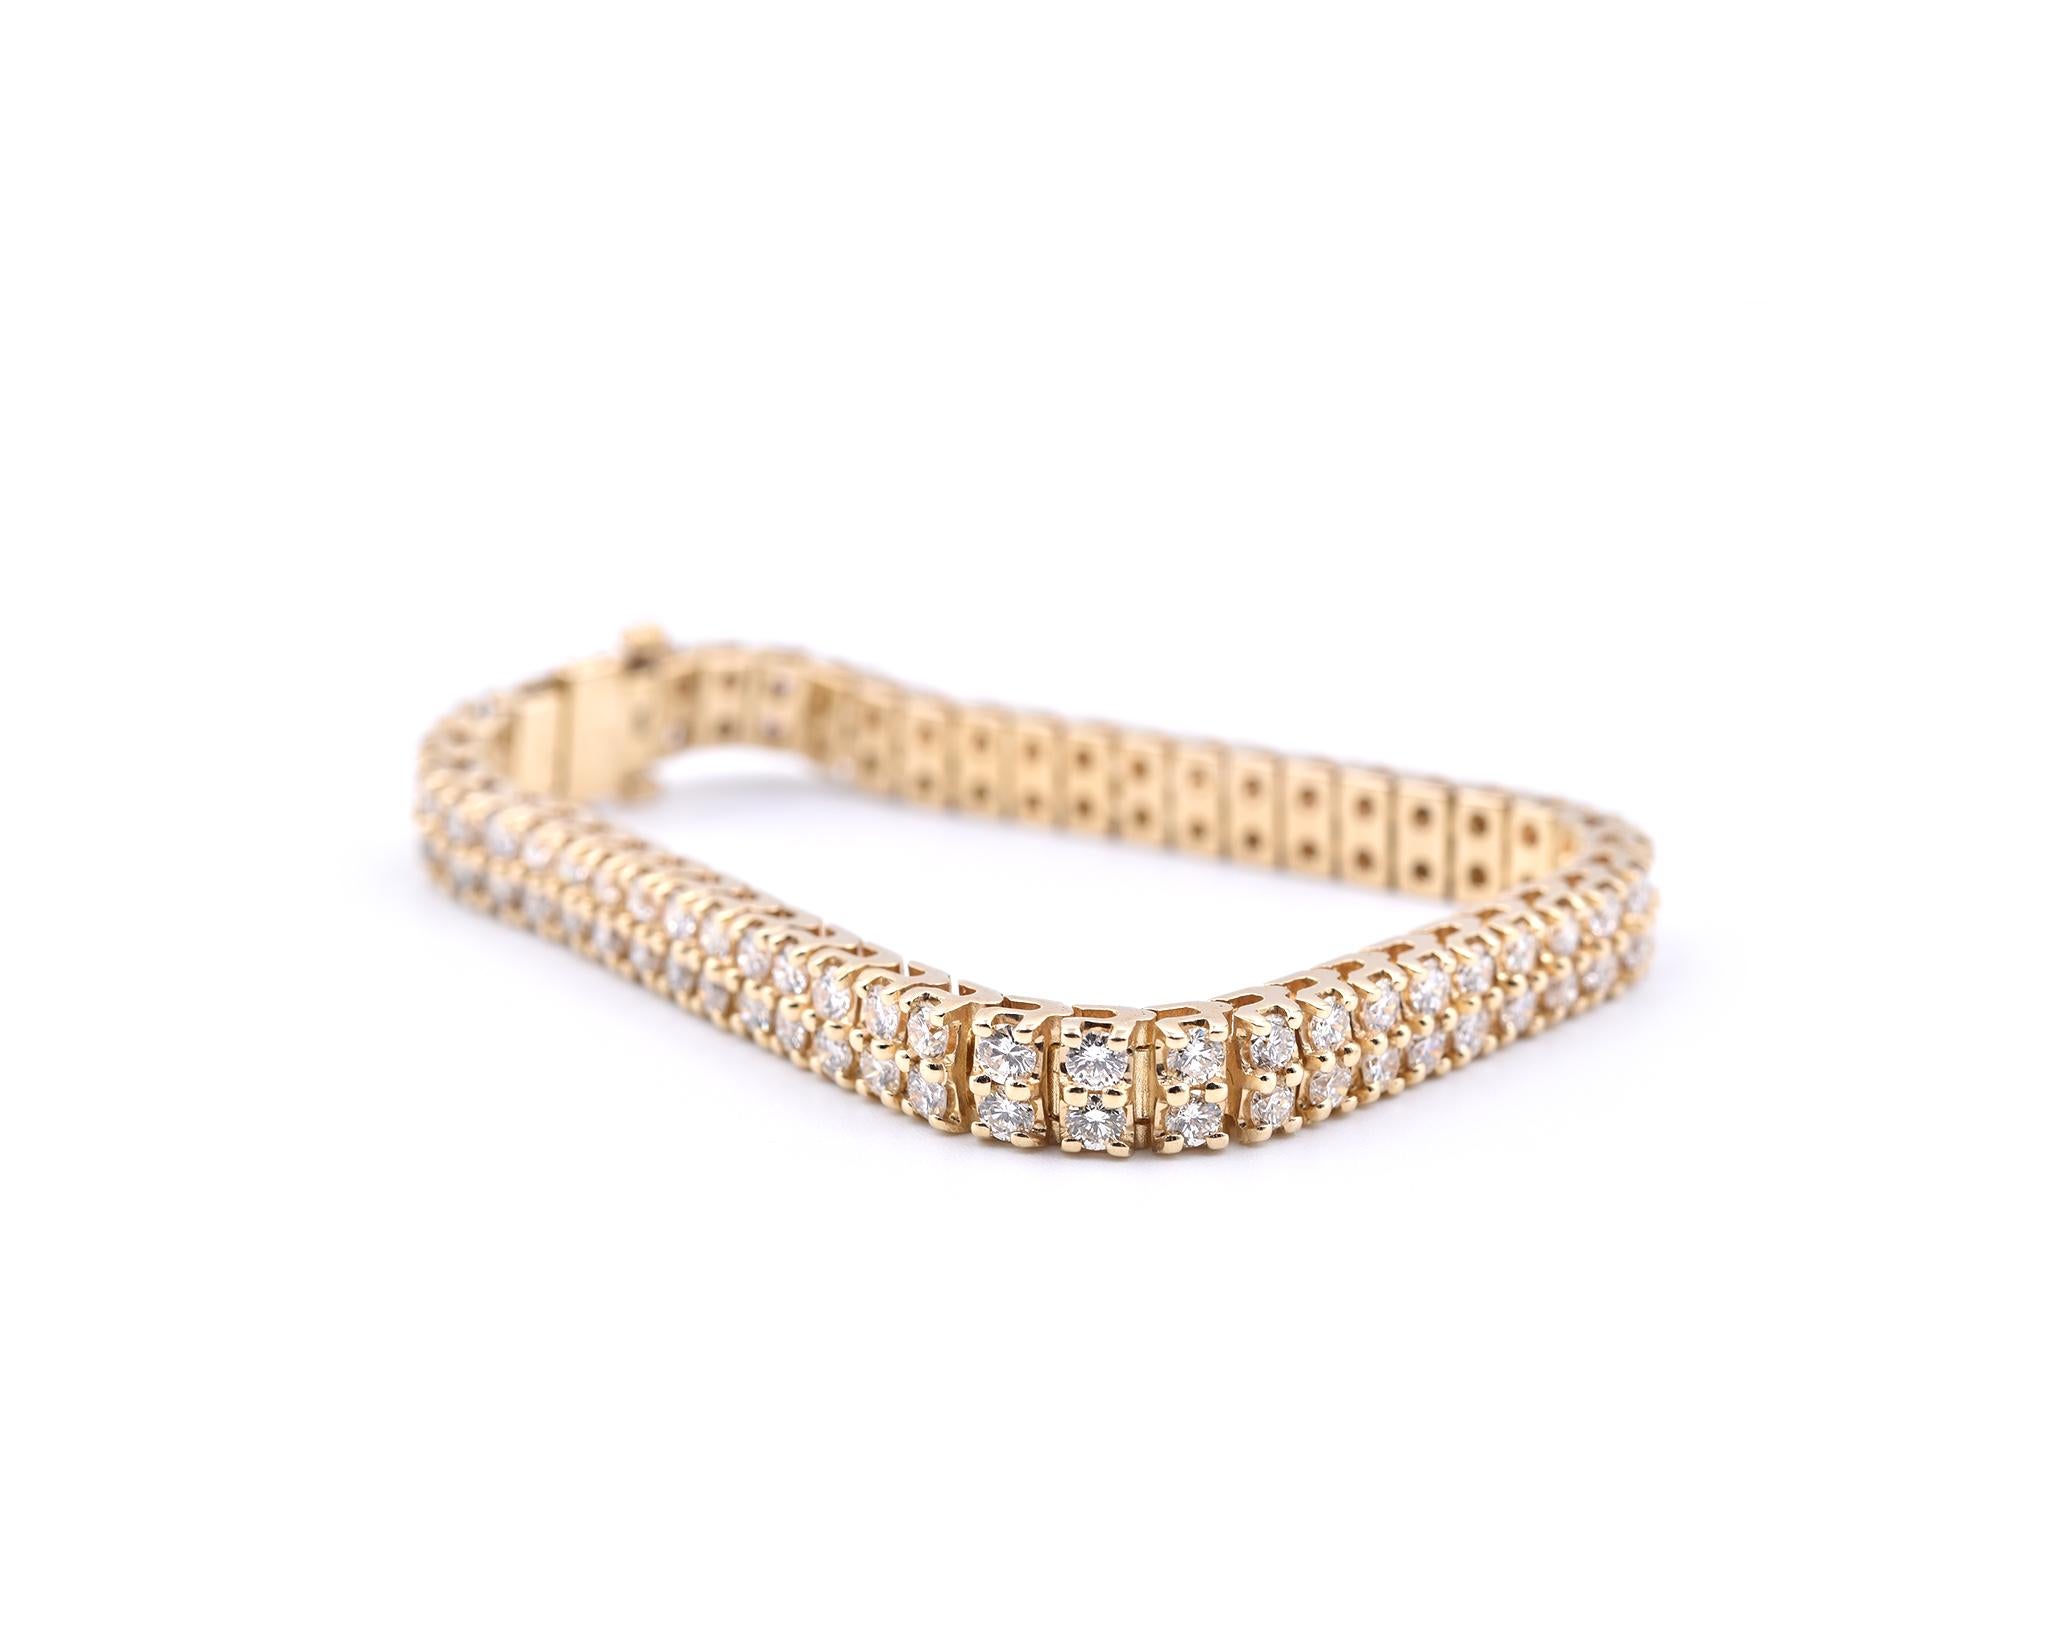 Designer: custom designed
Material: 14k yellow gold
Diamonds: 100 round brilliant cuts = 8.00cttw 
Color: I
Clarity: SI1
Dimensions: bracelet is 7 inches in length, and measures 6.40mm in width
Weight: 31.95 grams